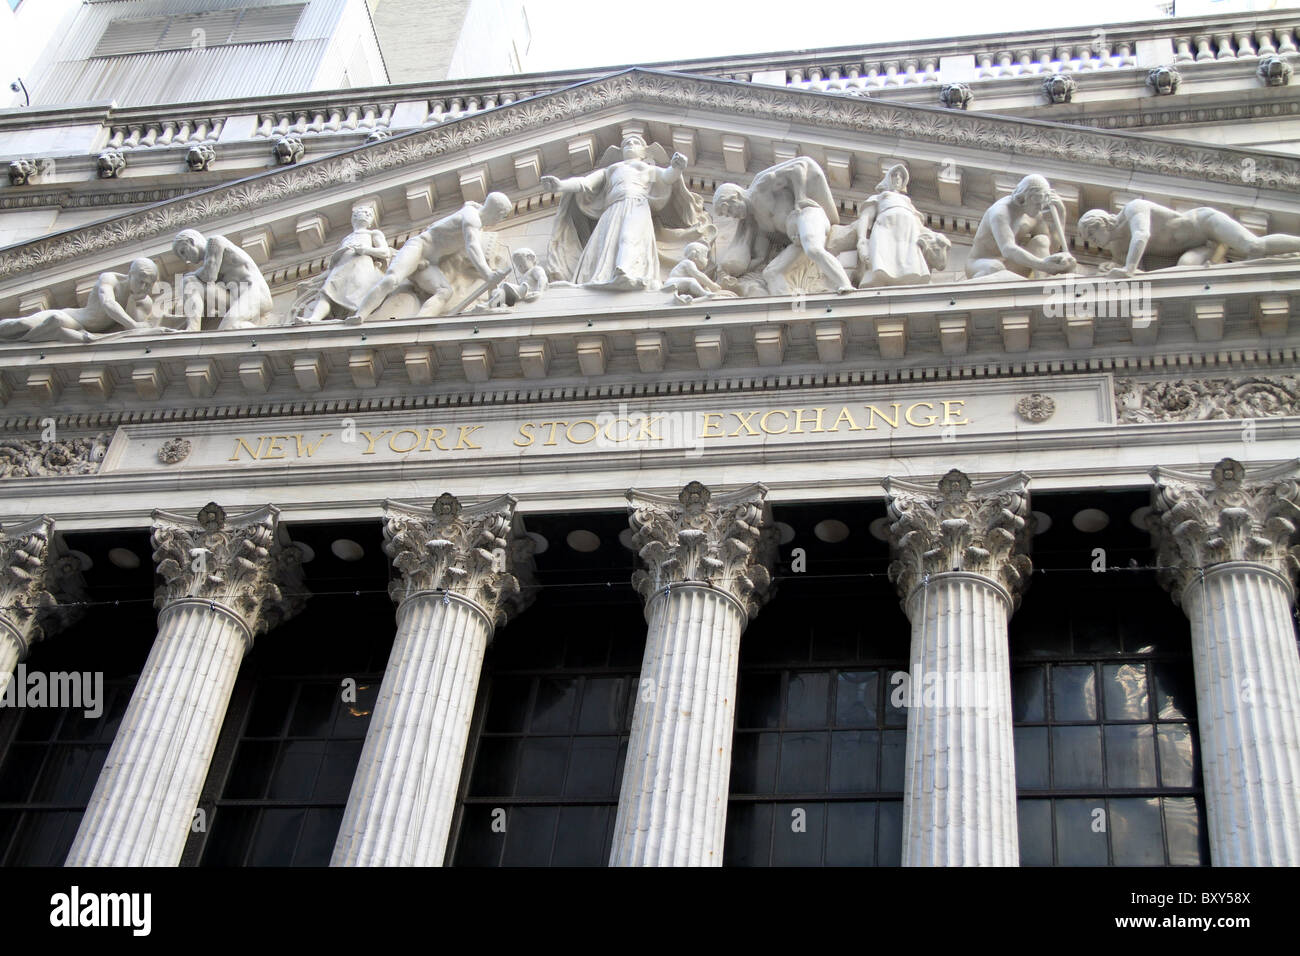 New York Stock Exchange in the Wall Street Financial District of downtown New York, America Stock Photo